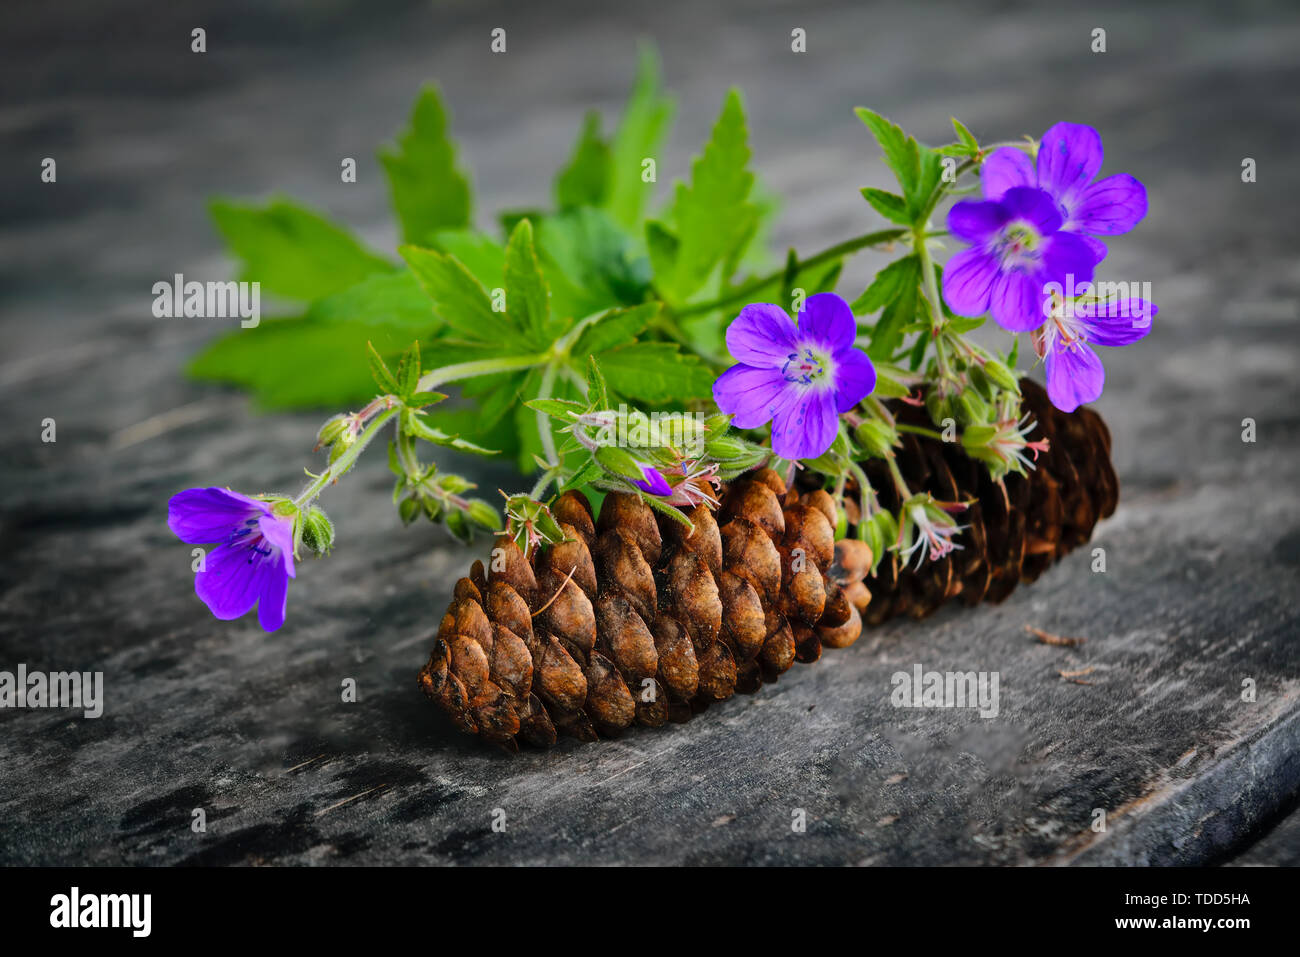 Forest geranium and dry fir cones against the background of a wooden table close-up. Geranium sylvaticum L. Stock Photo